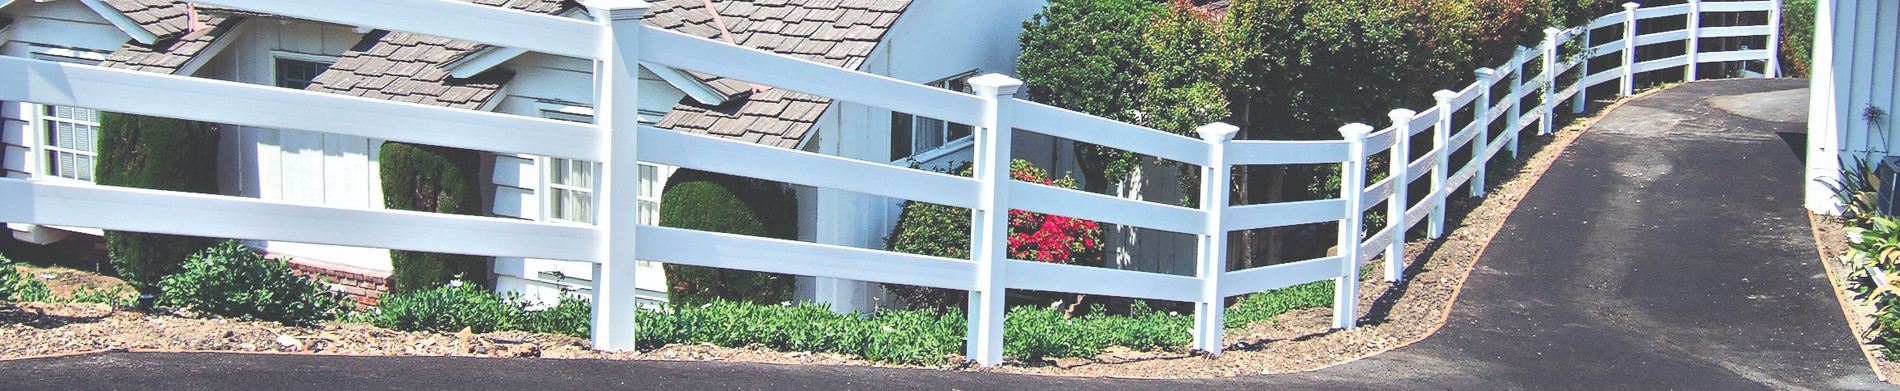 High-quality vinyl Ranch Rail fence from Duramax – Certified fences made of 100% virgin vinyl